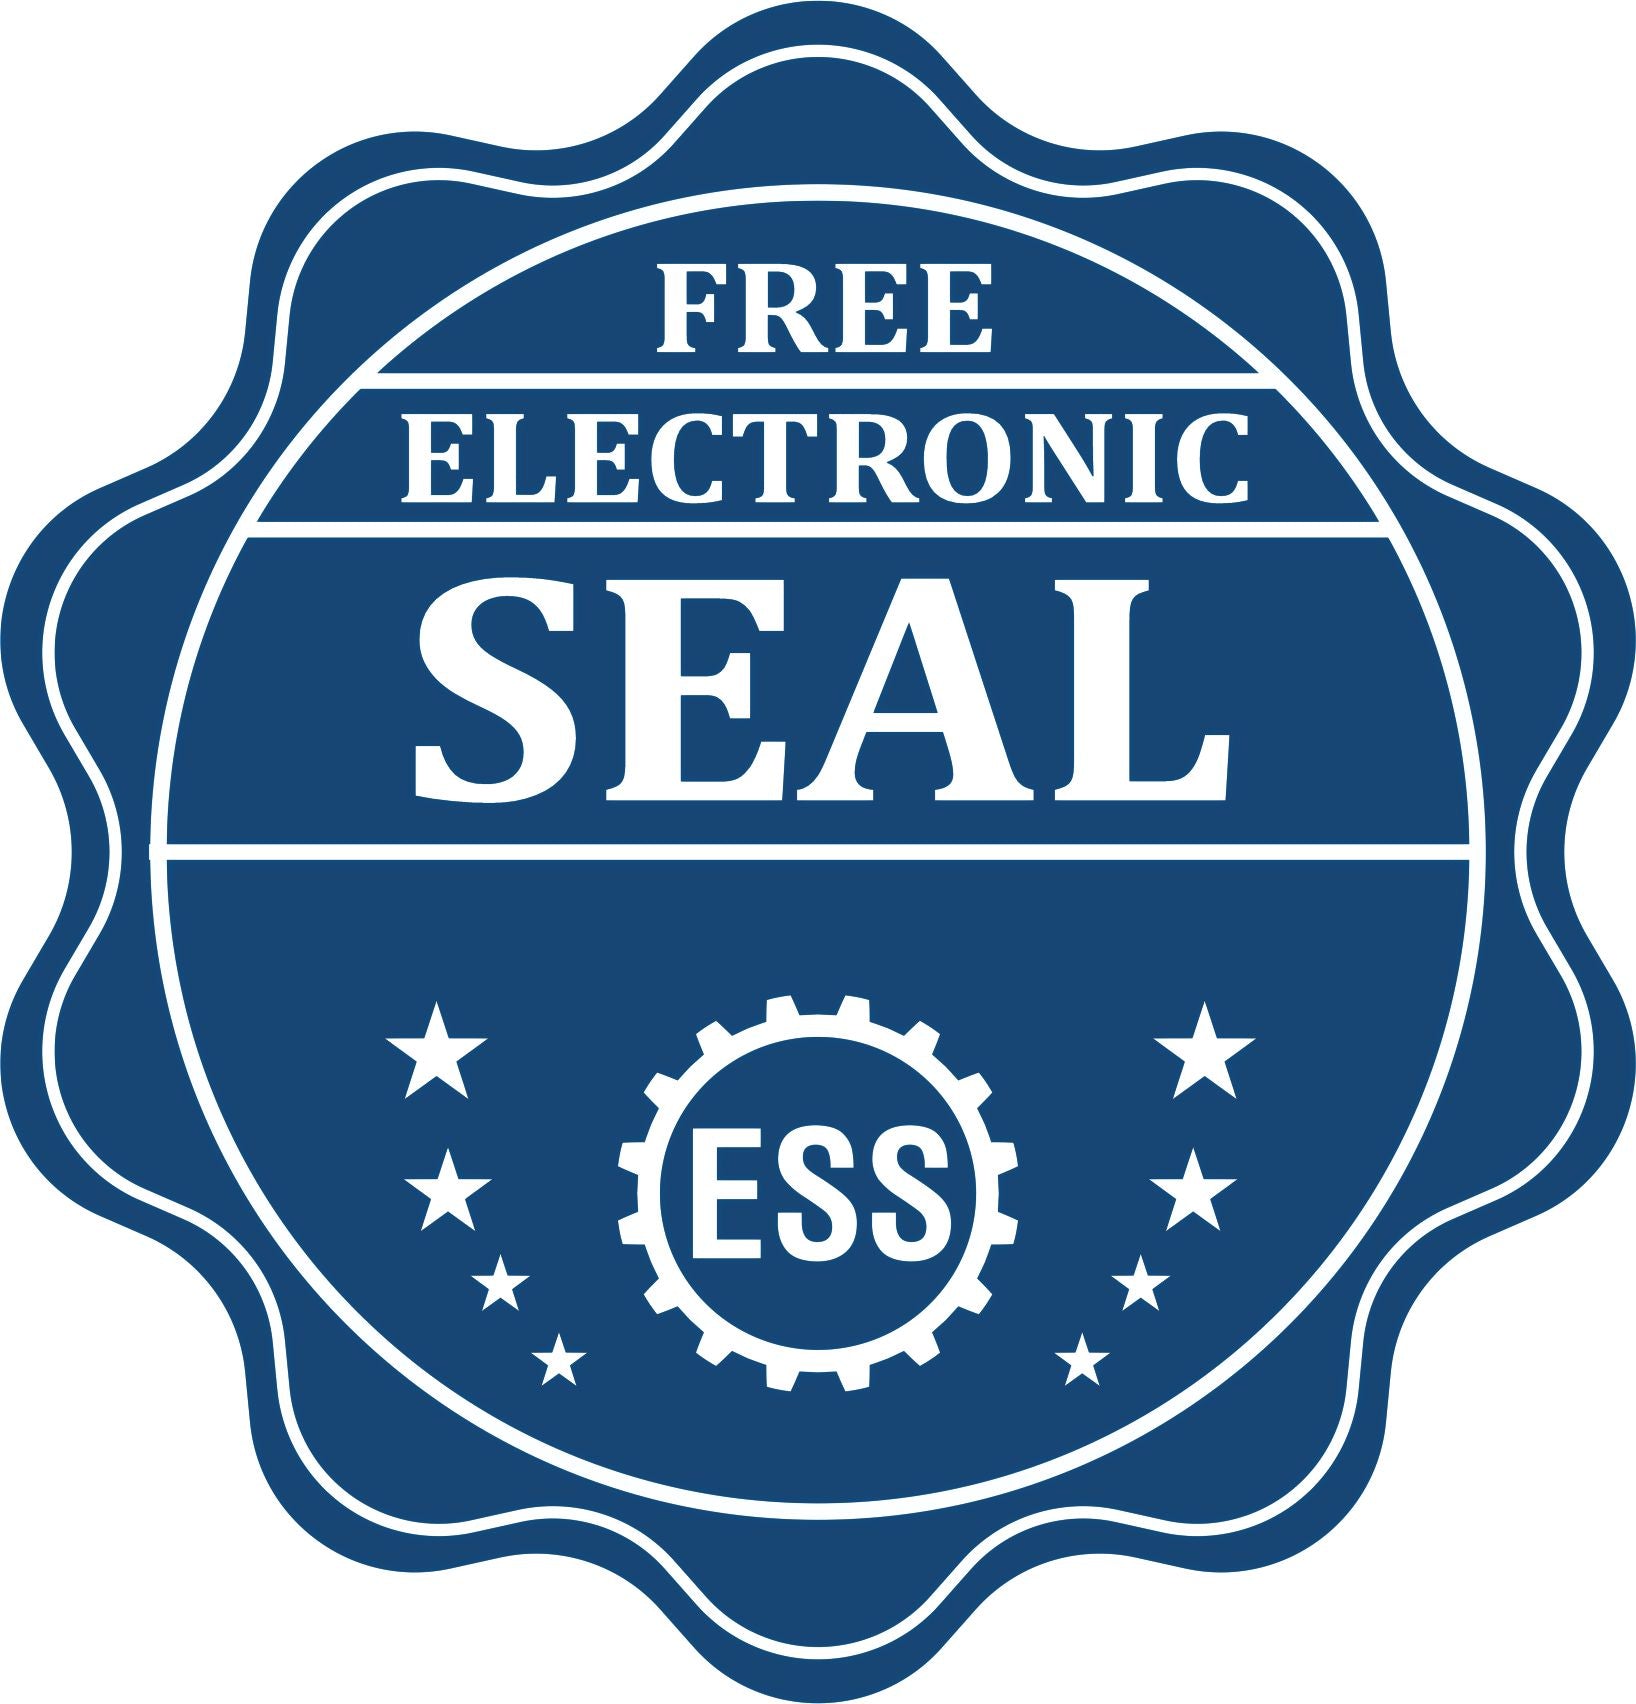 A badge showing a free electronic seal for the Soft New Hampshire Professional Geologist Seal with stars and the ESS gear on the emblem.